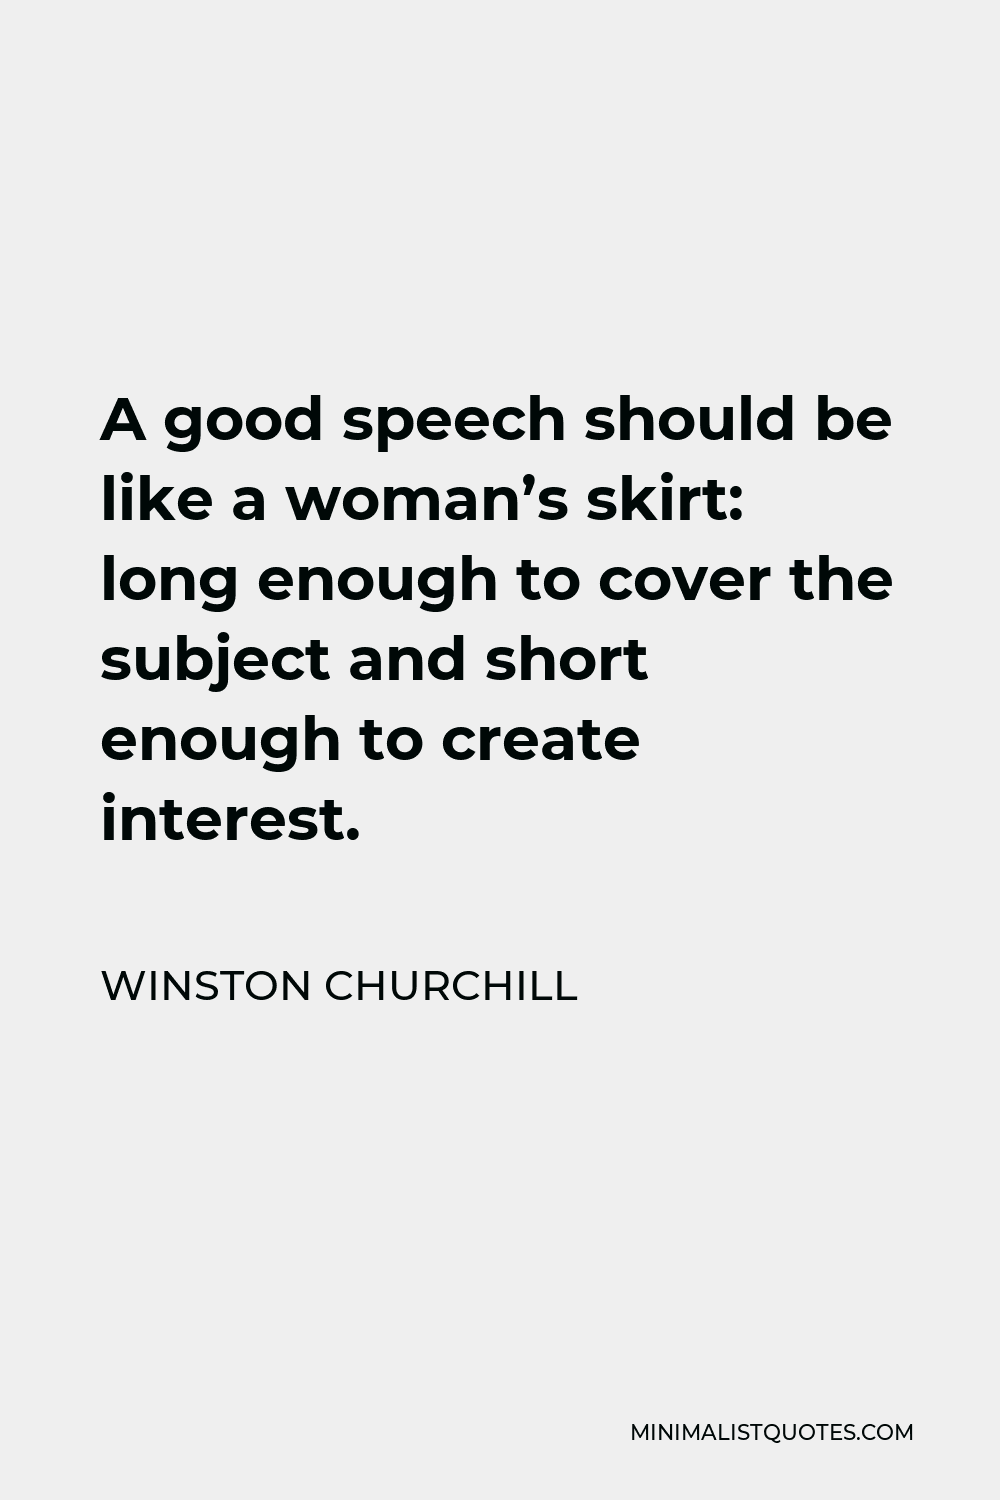 Winston Churchill Quote - A good speech should be like a woman’s skirt: long enough to cover the subject and short enough to create interest.